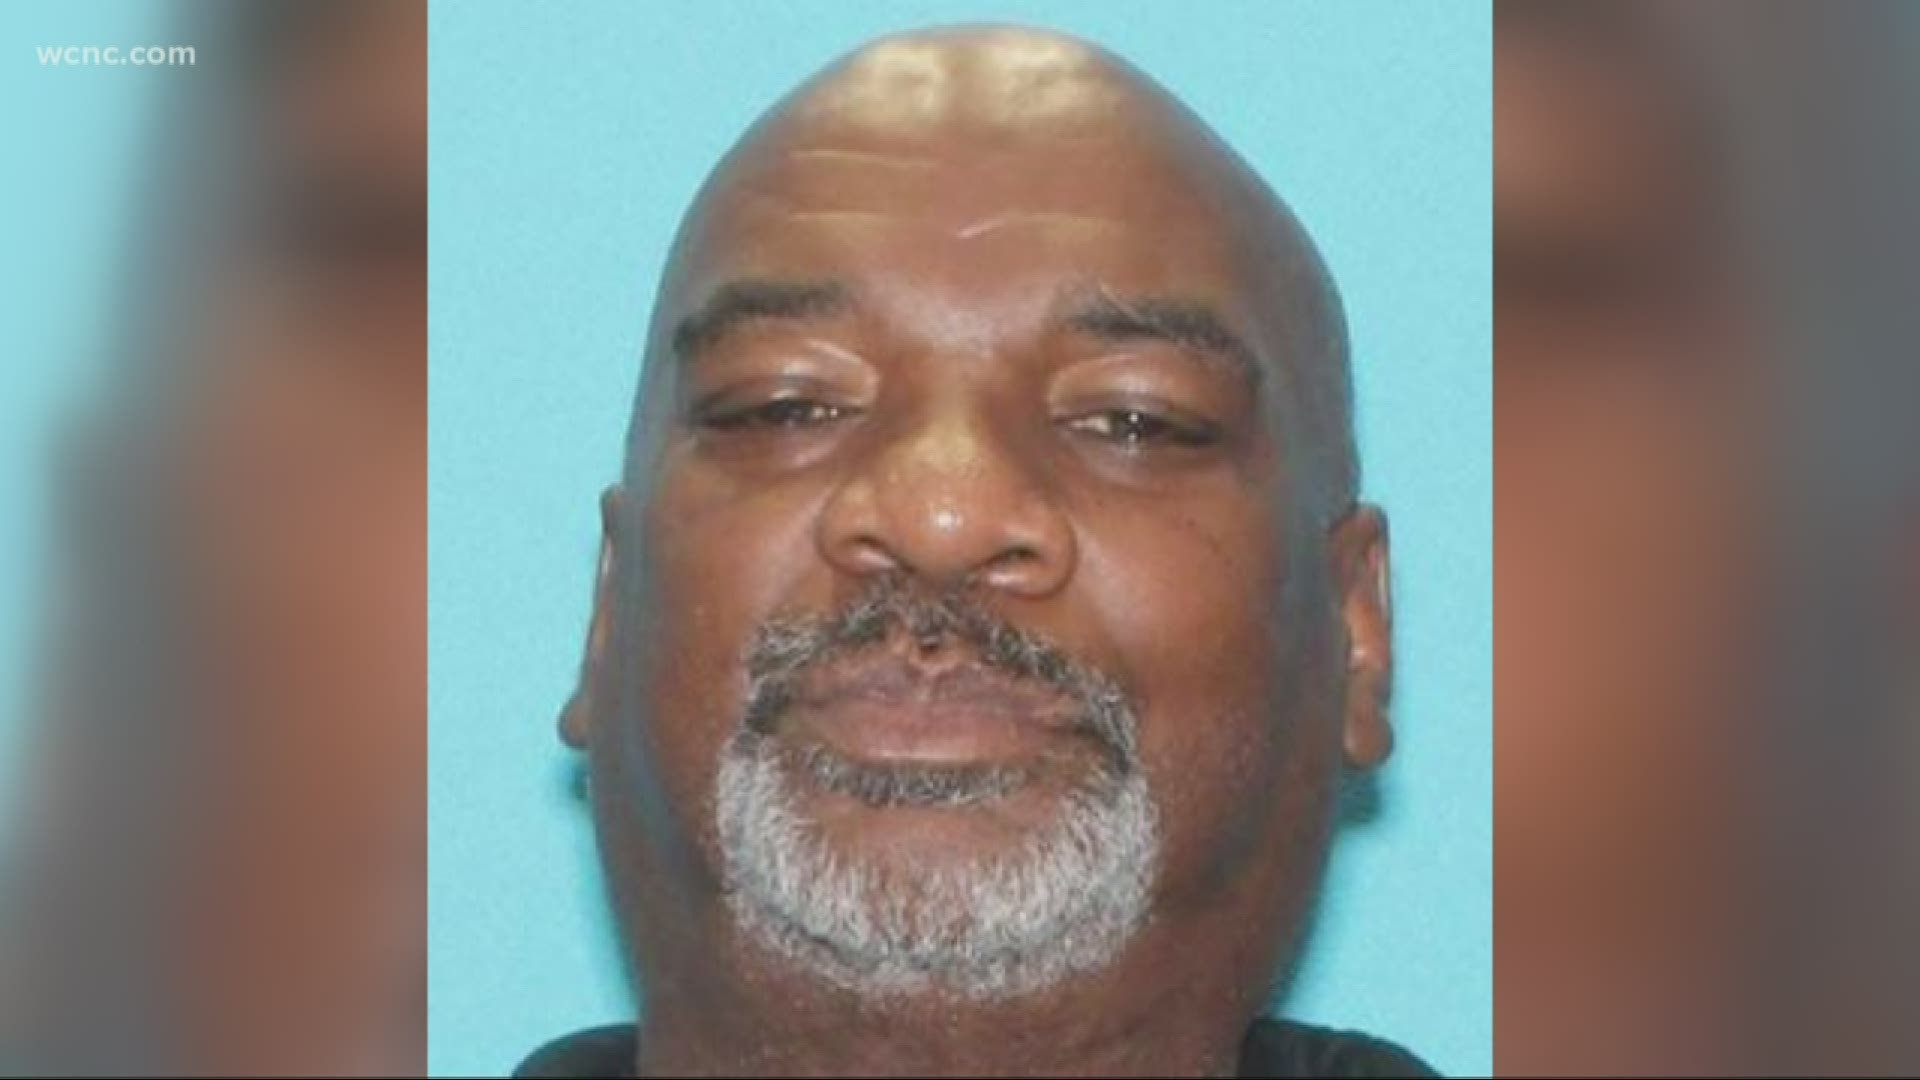 63-year-old Otis Stewart was reported missing after he disappeared Thursday evening. Saturday, police say he was reunited with his family.